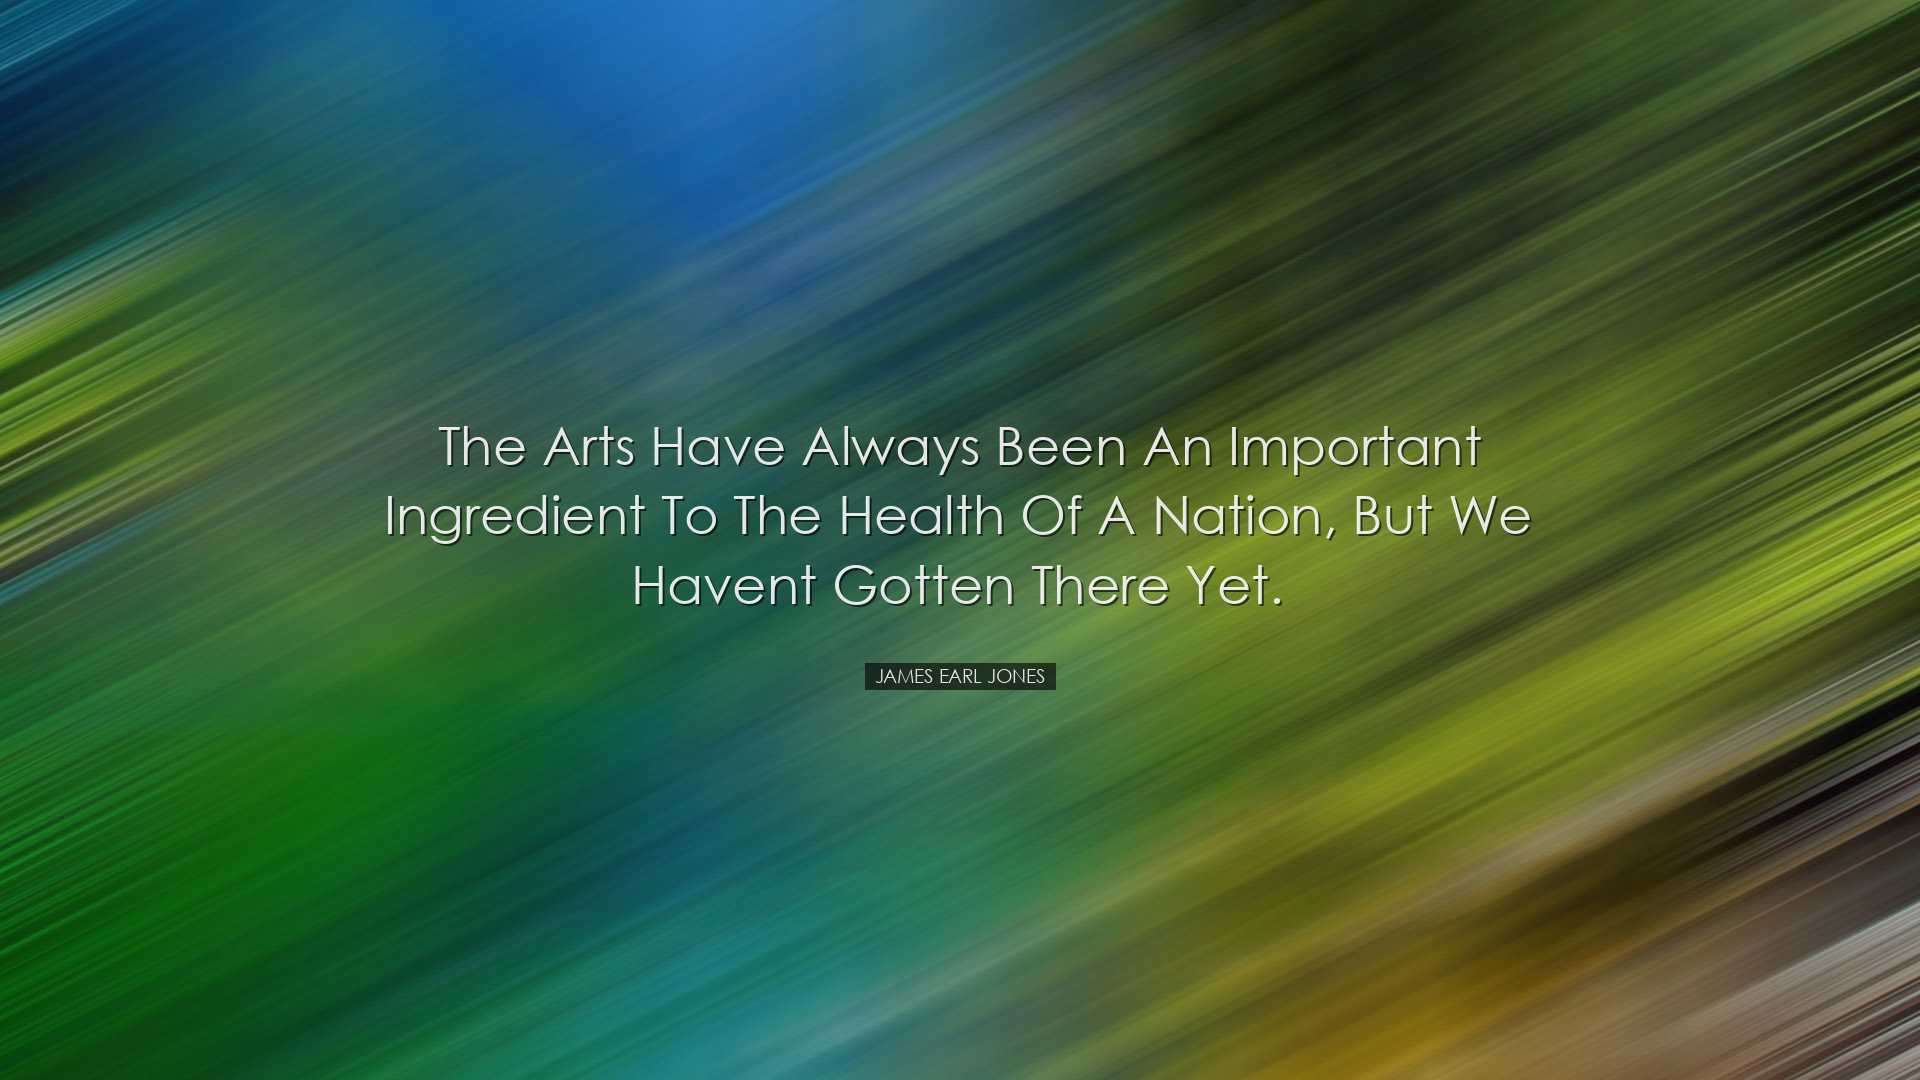 The arts have always been an important ingredient to the health of